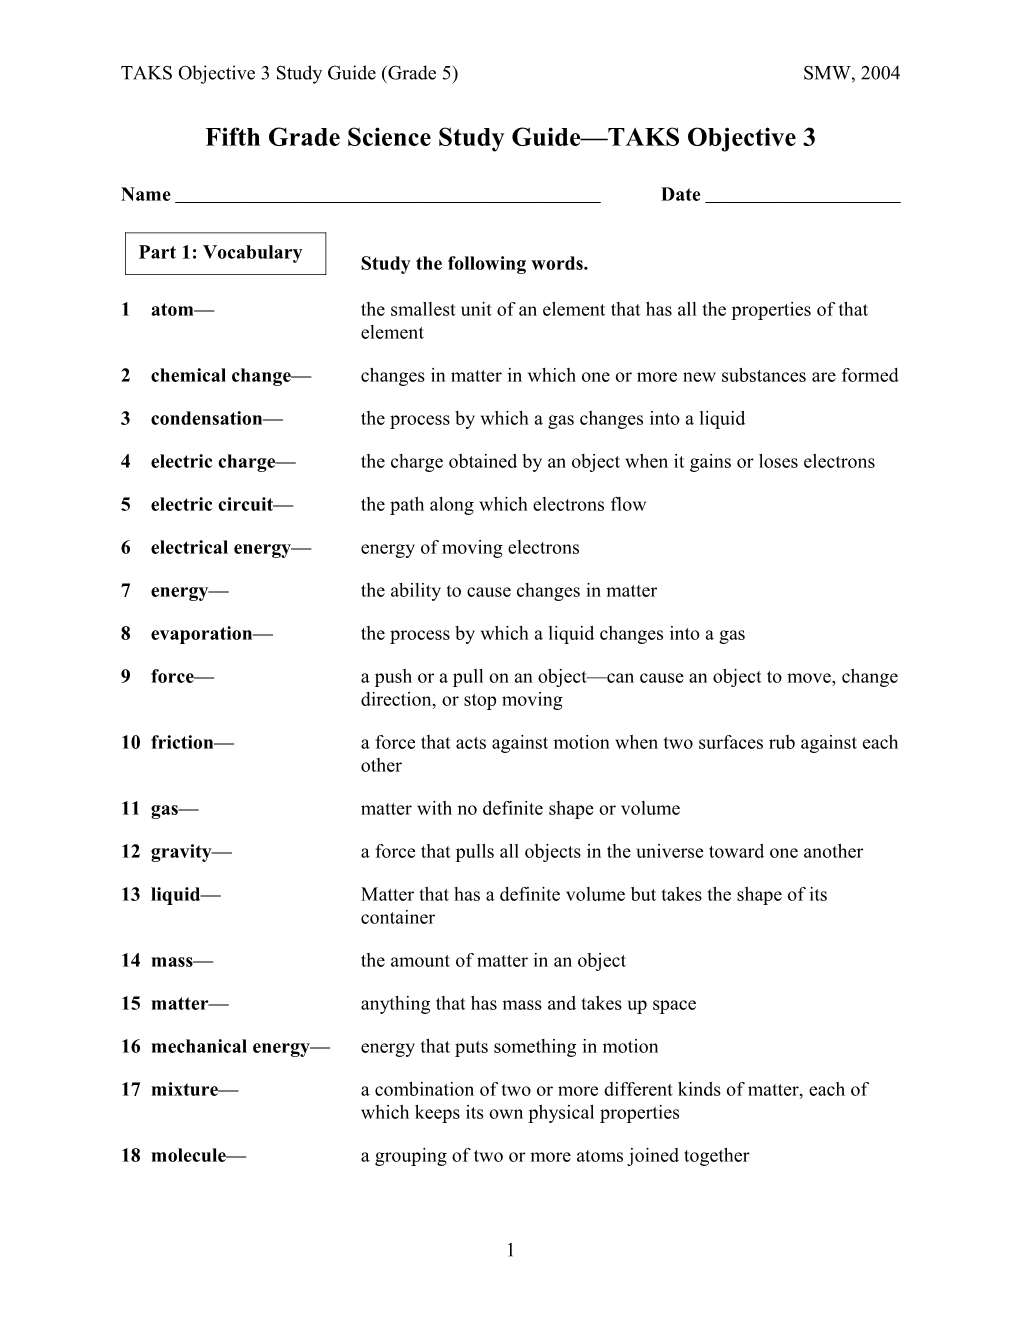 Fifth Grade Science Study Guide TAKS Objective 1